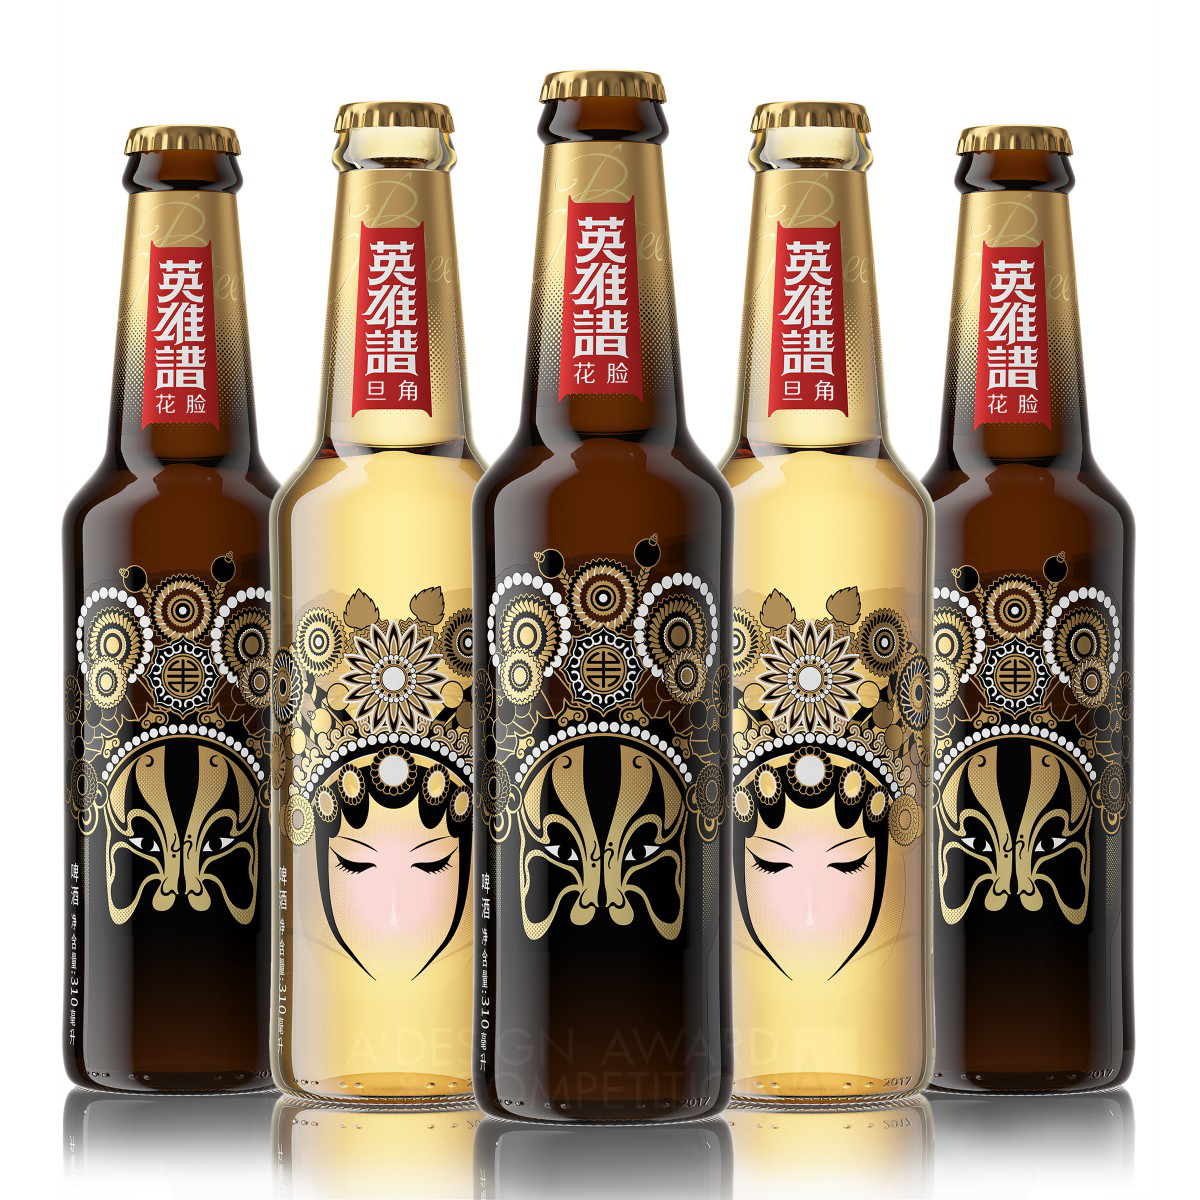 Snow Breweries-Ying Xiong Pu Beer by TIGER PAN